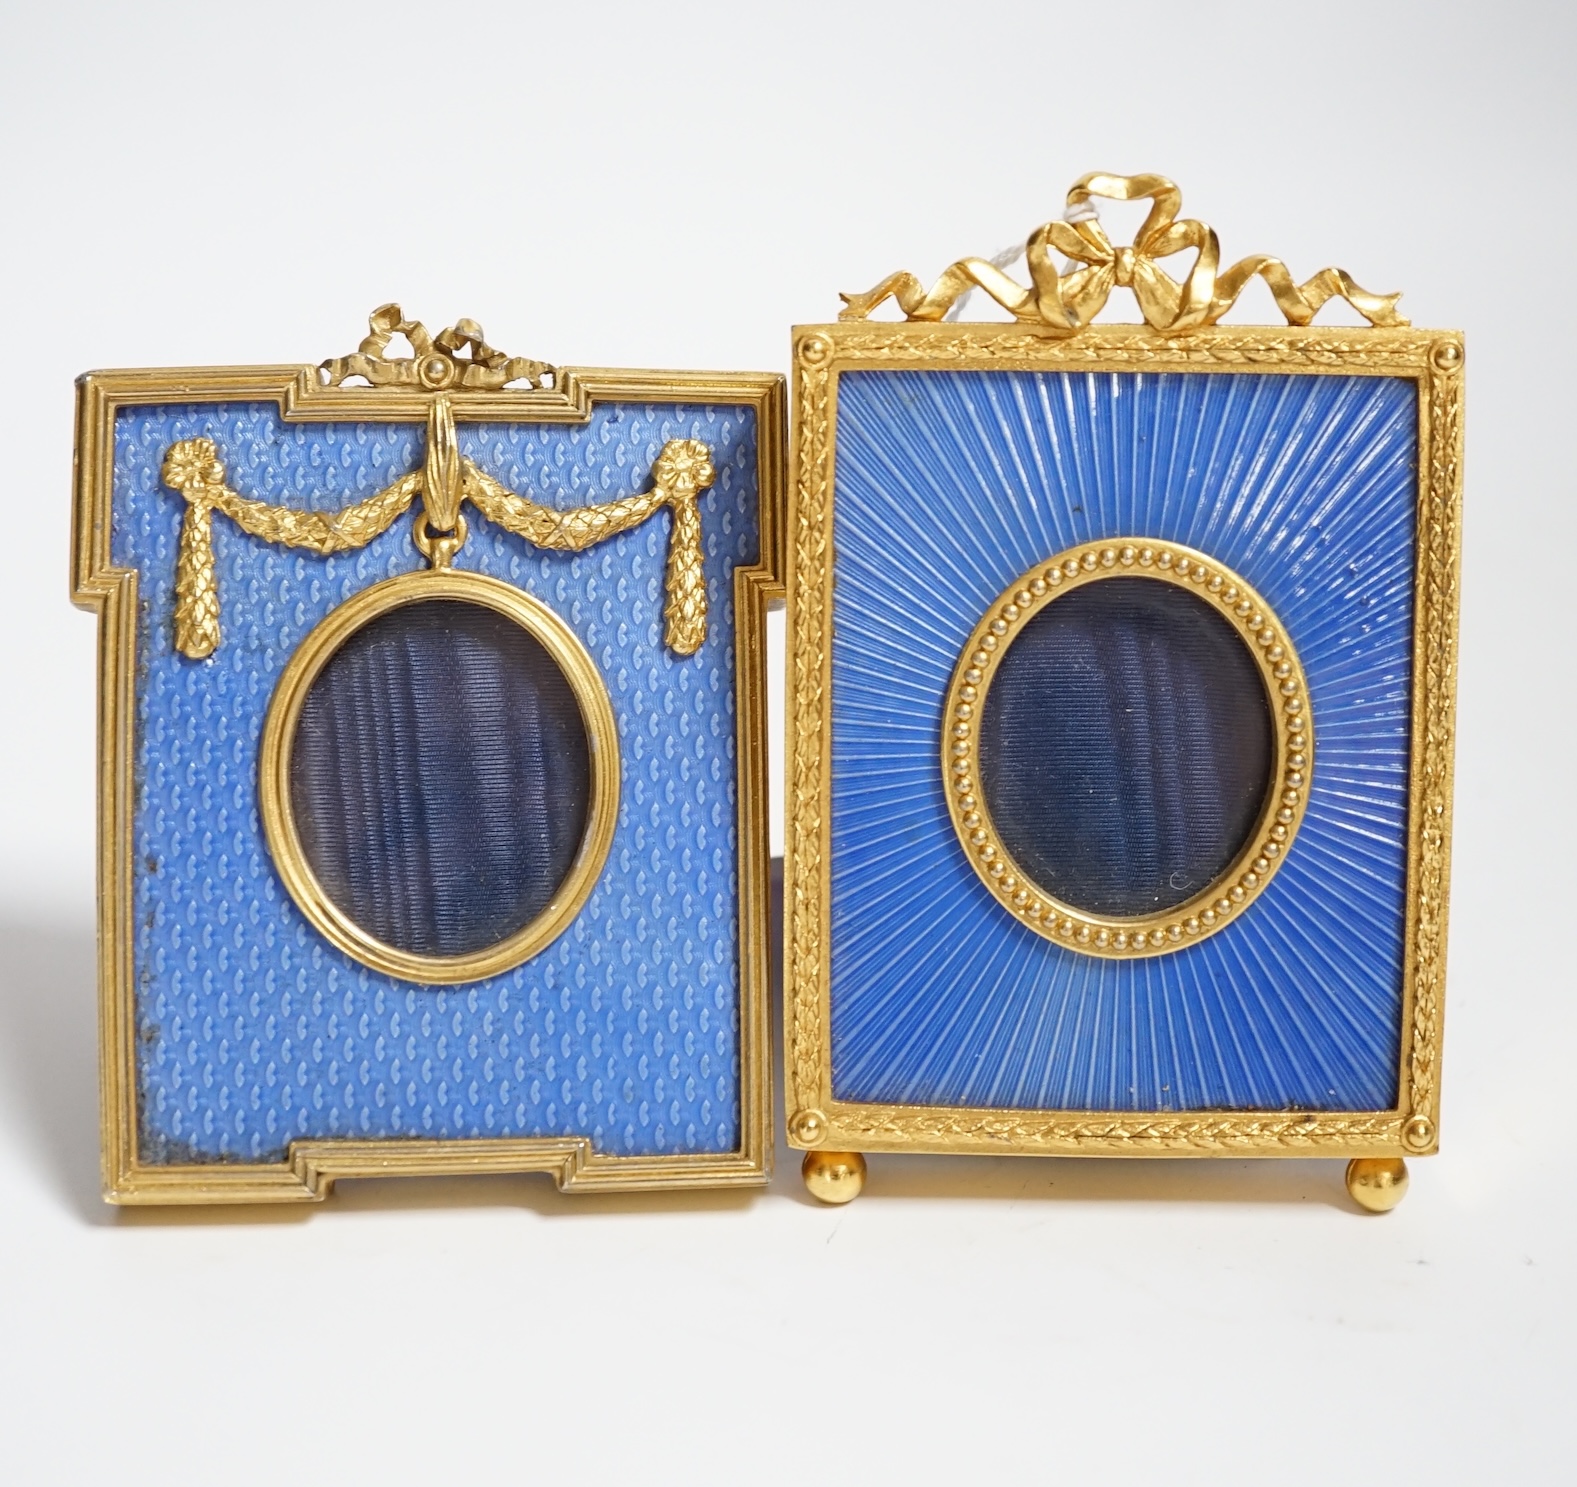 Two gilt metal and enamel miniature frames with fitted cases, largest 11cm high